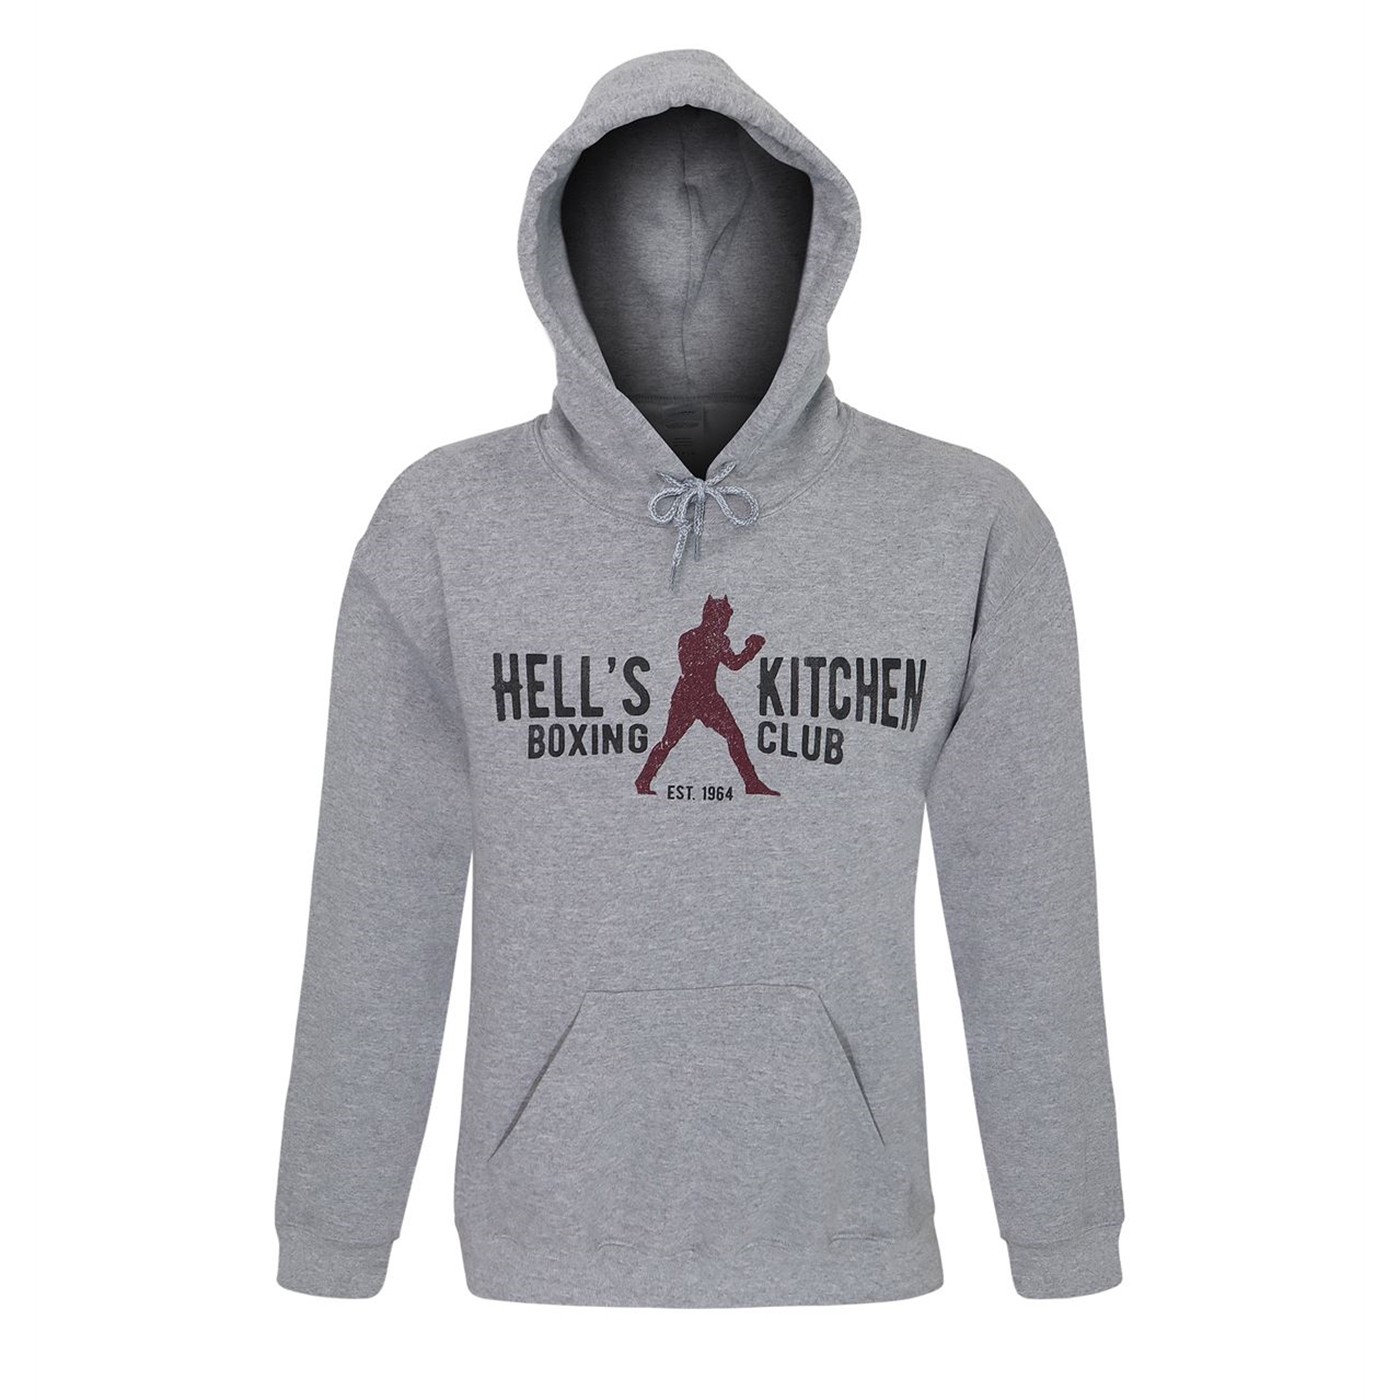 Hell's Kitchen Boxing Club Men's Hoodie